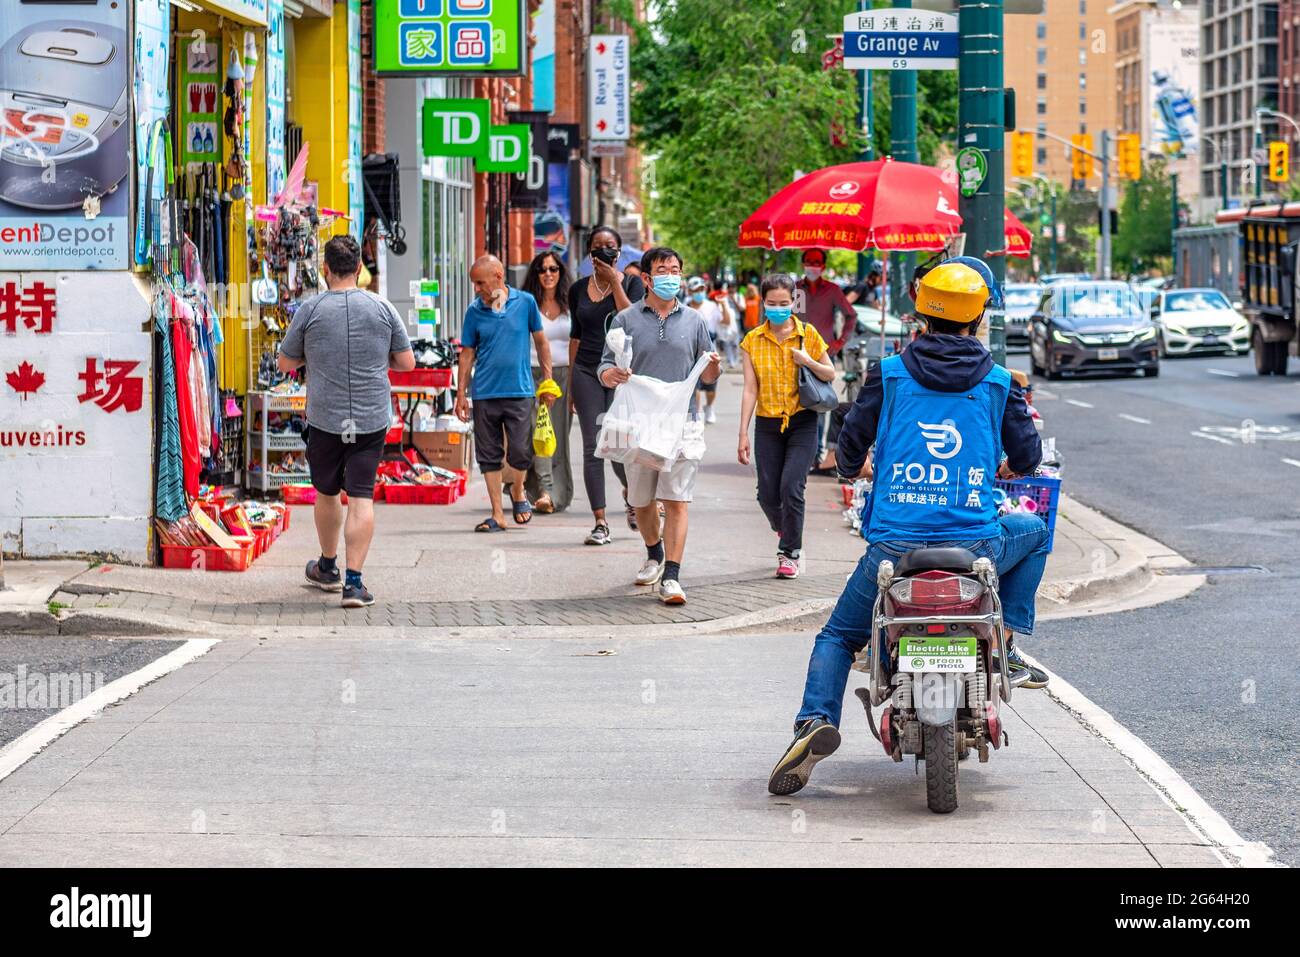 Food delivery in electric bike in the Chinatown district, Toronto, Canada Stock Photo